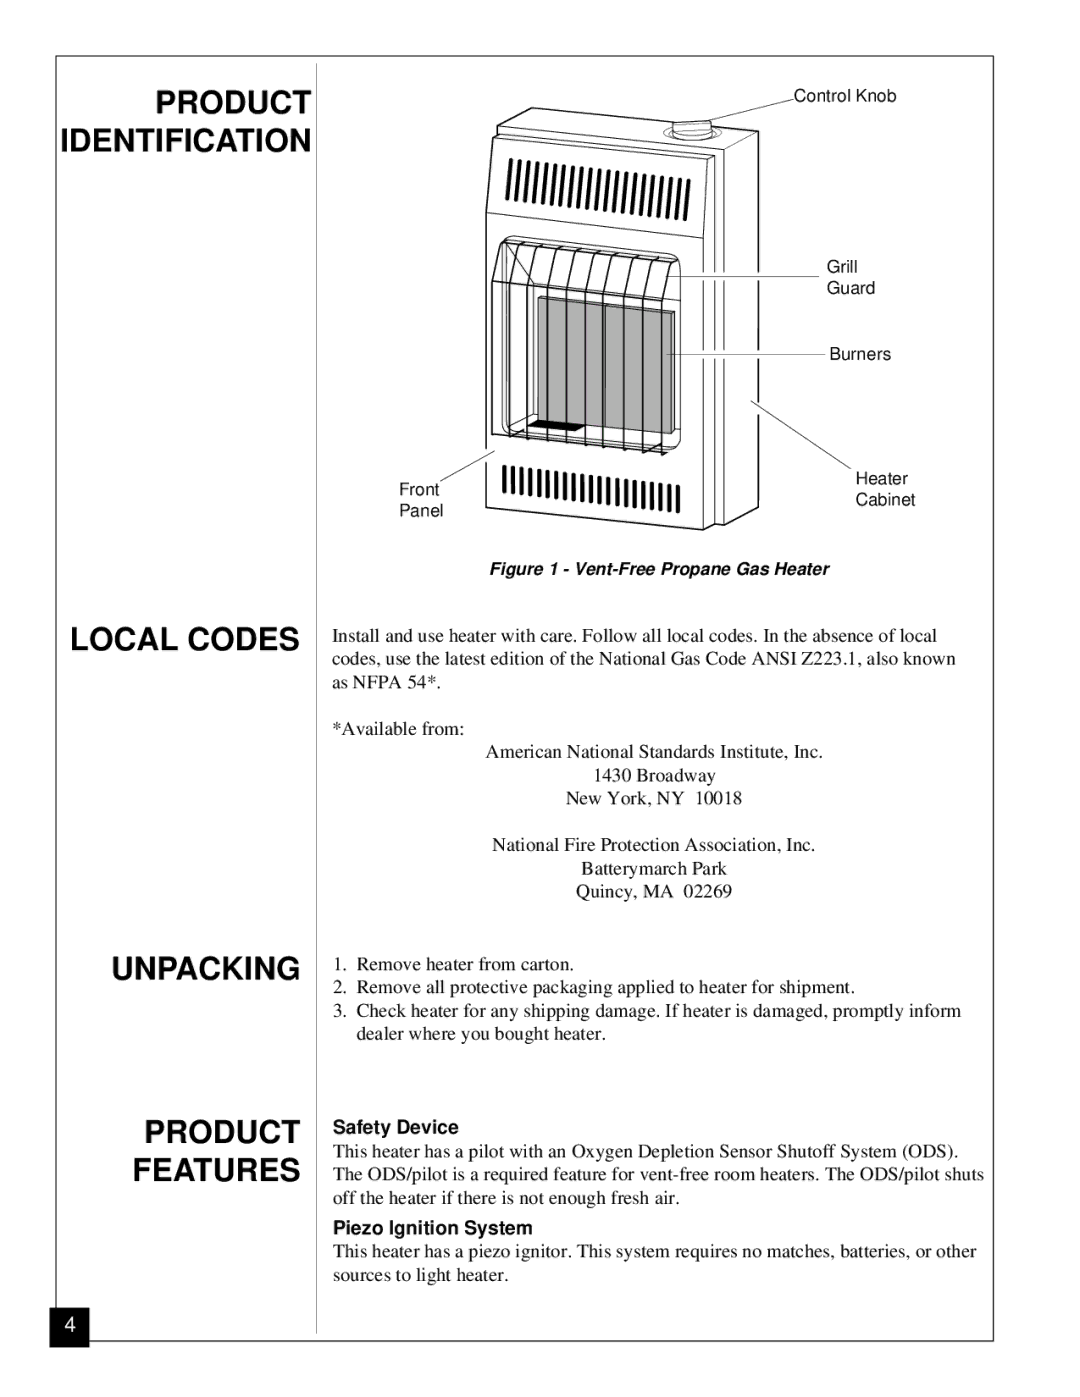 Desa Tech CGP11 Product Identification, Local Codes Unpacking Product Features, Safety Device, Piezo Ignition System 